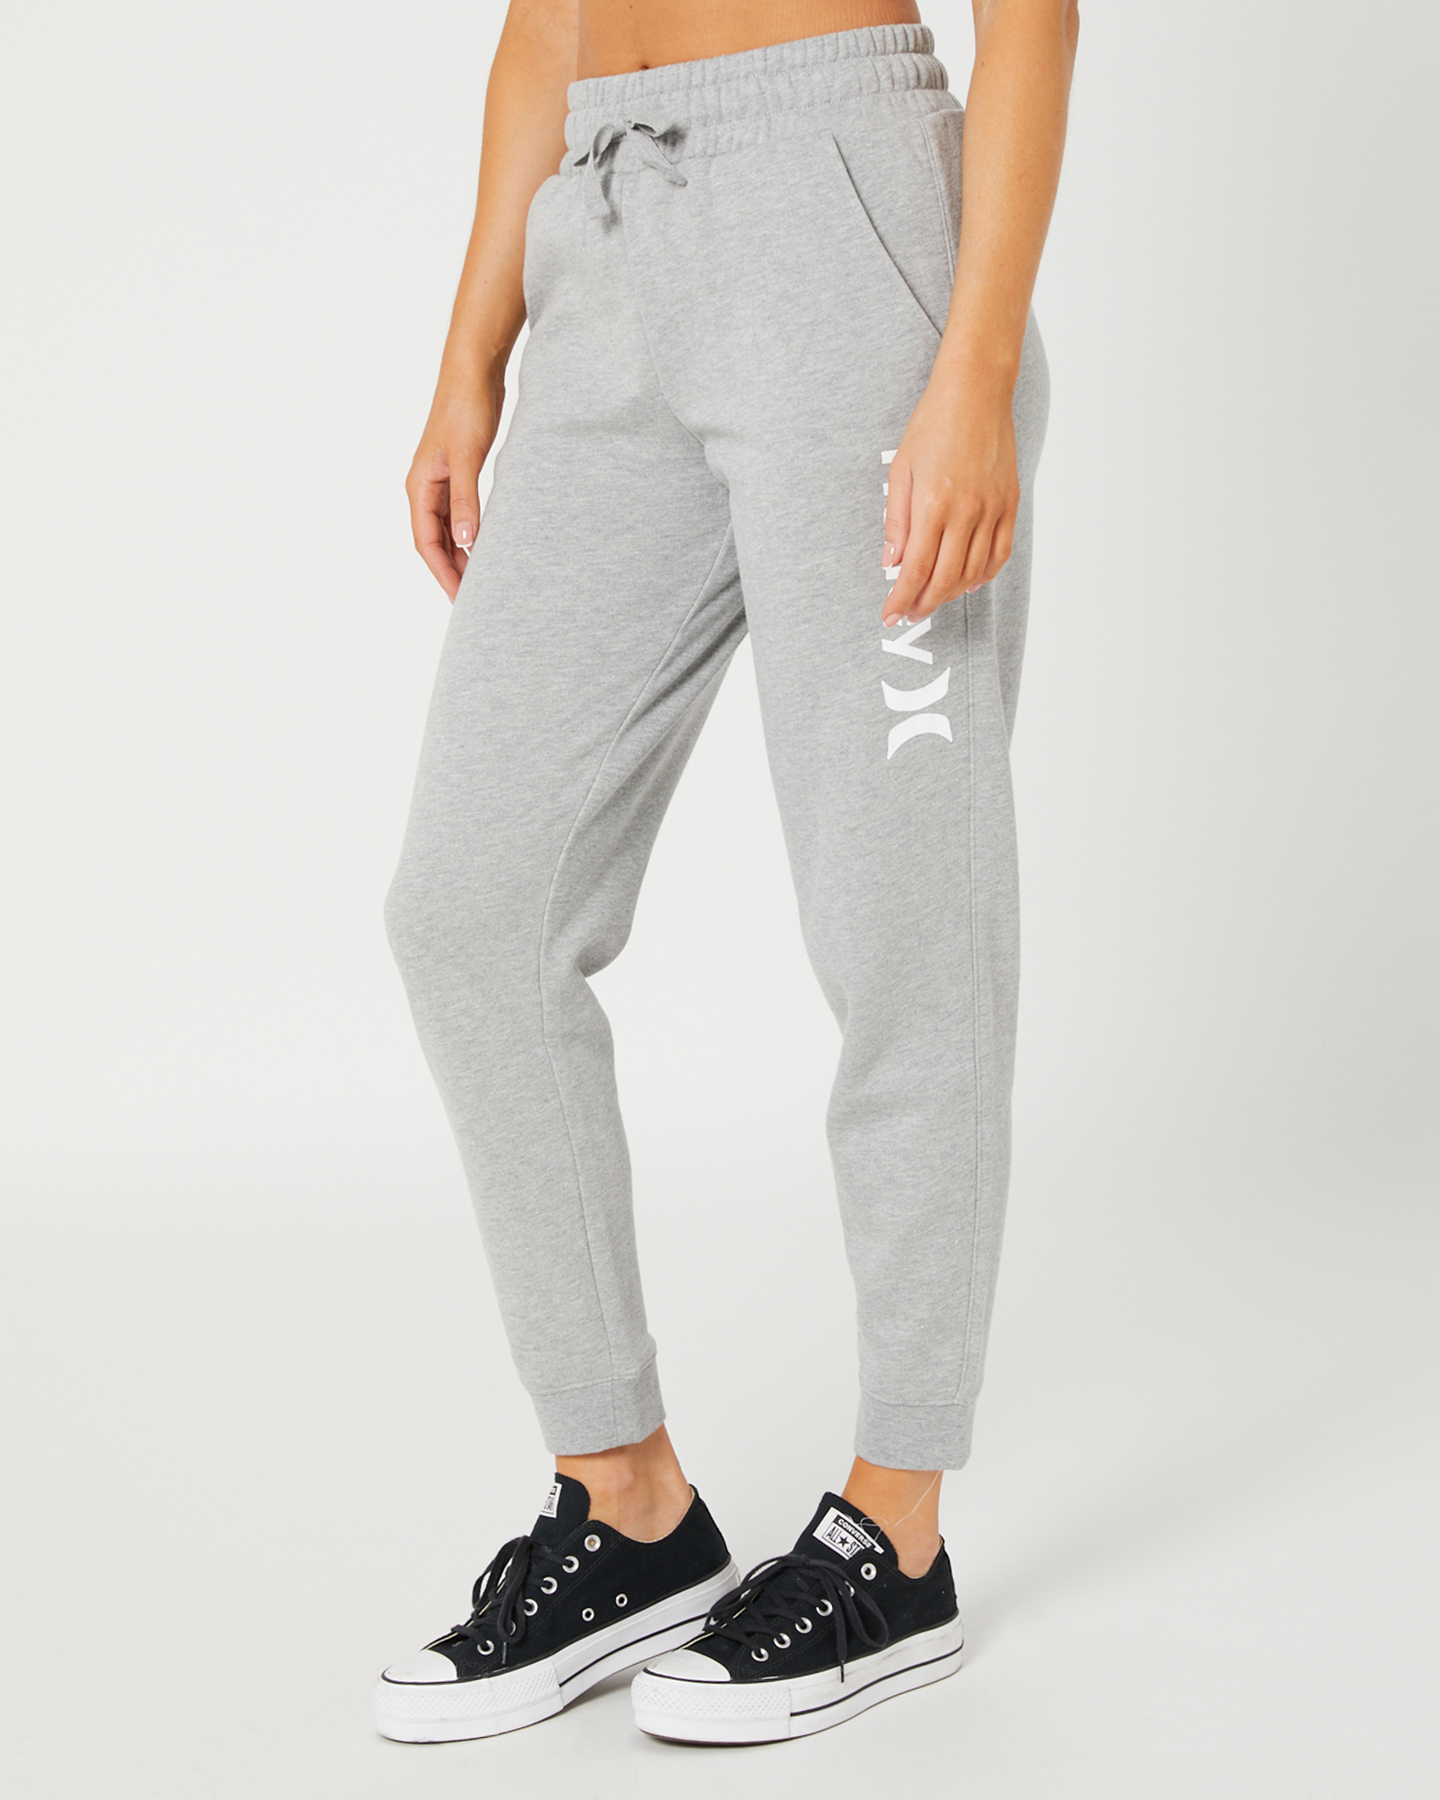 Hurley Oao Core Cuff Trackpant - Dark Grey Heather | SurfStitch